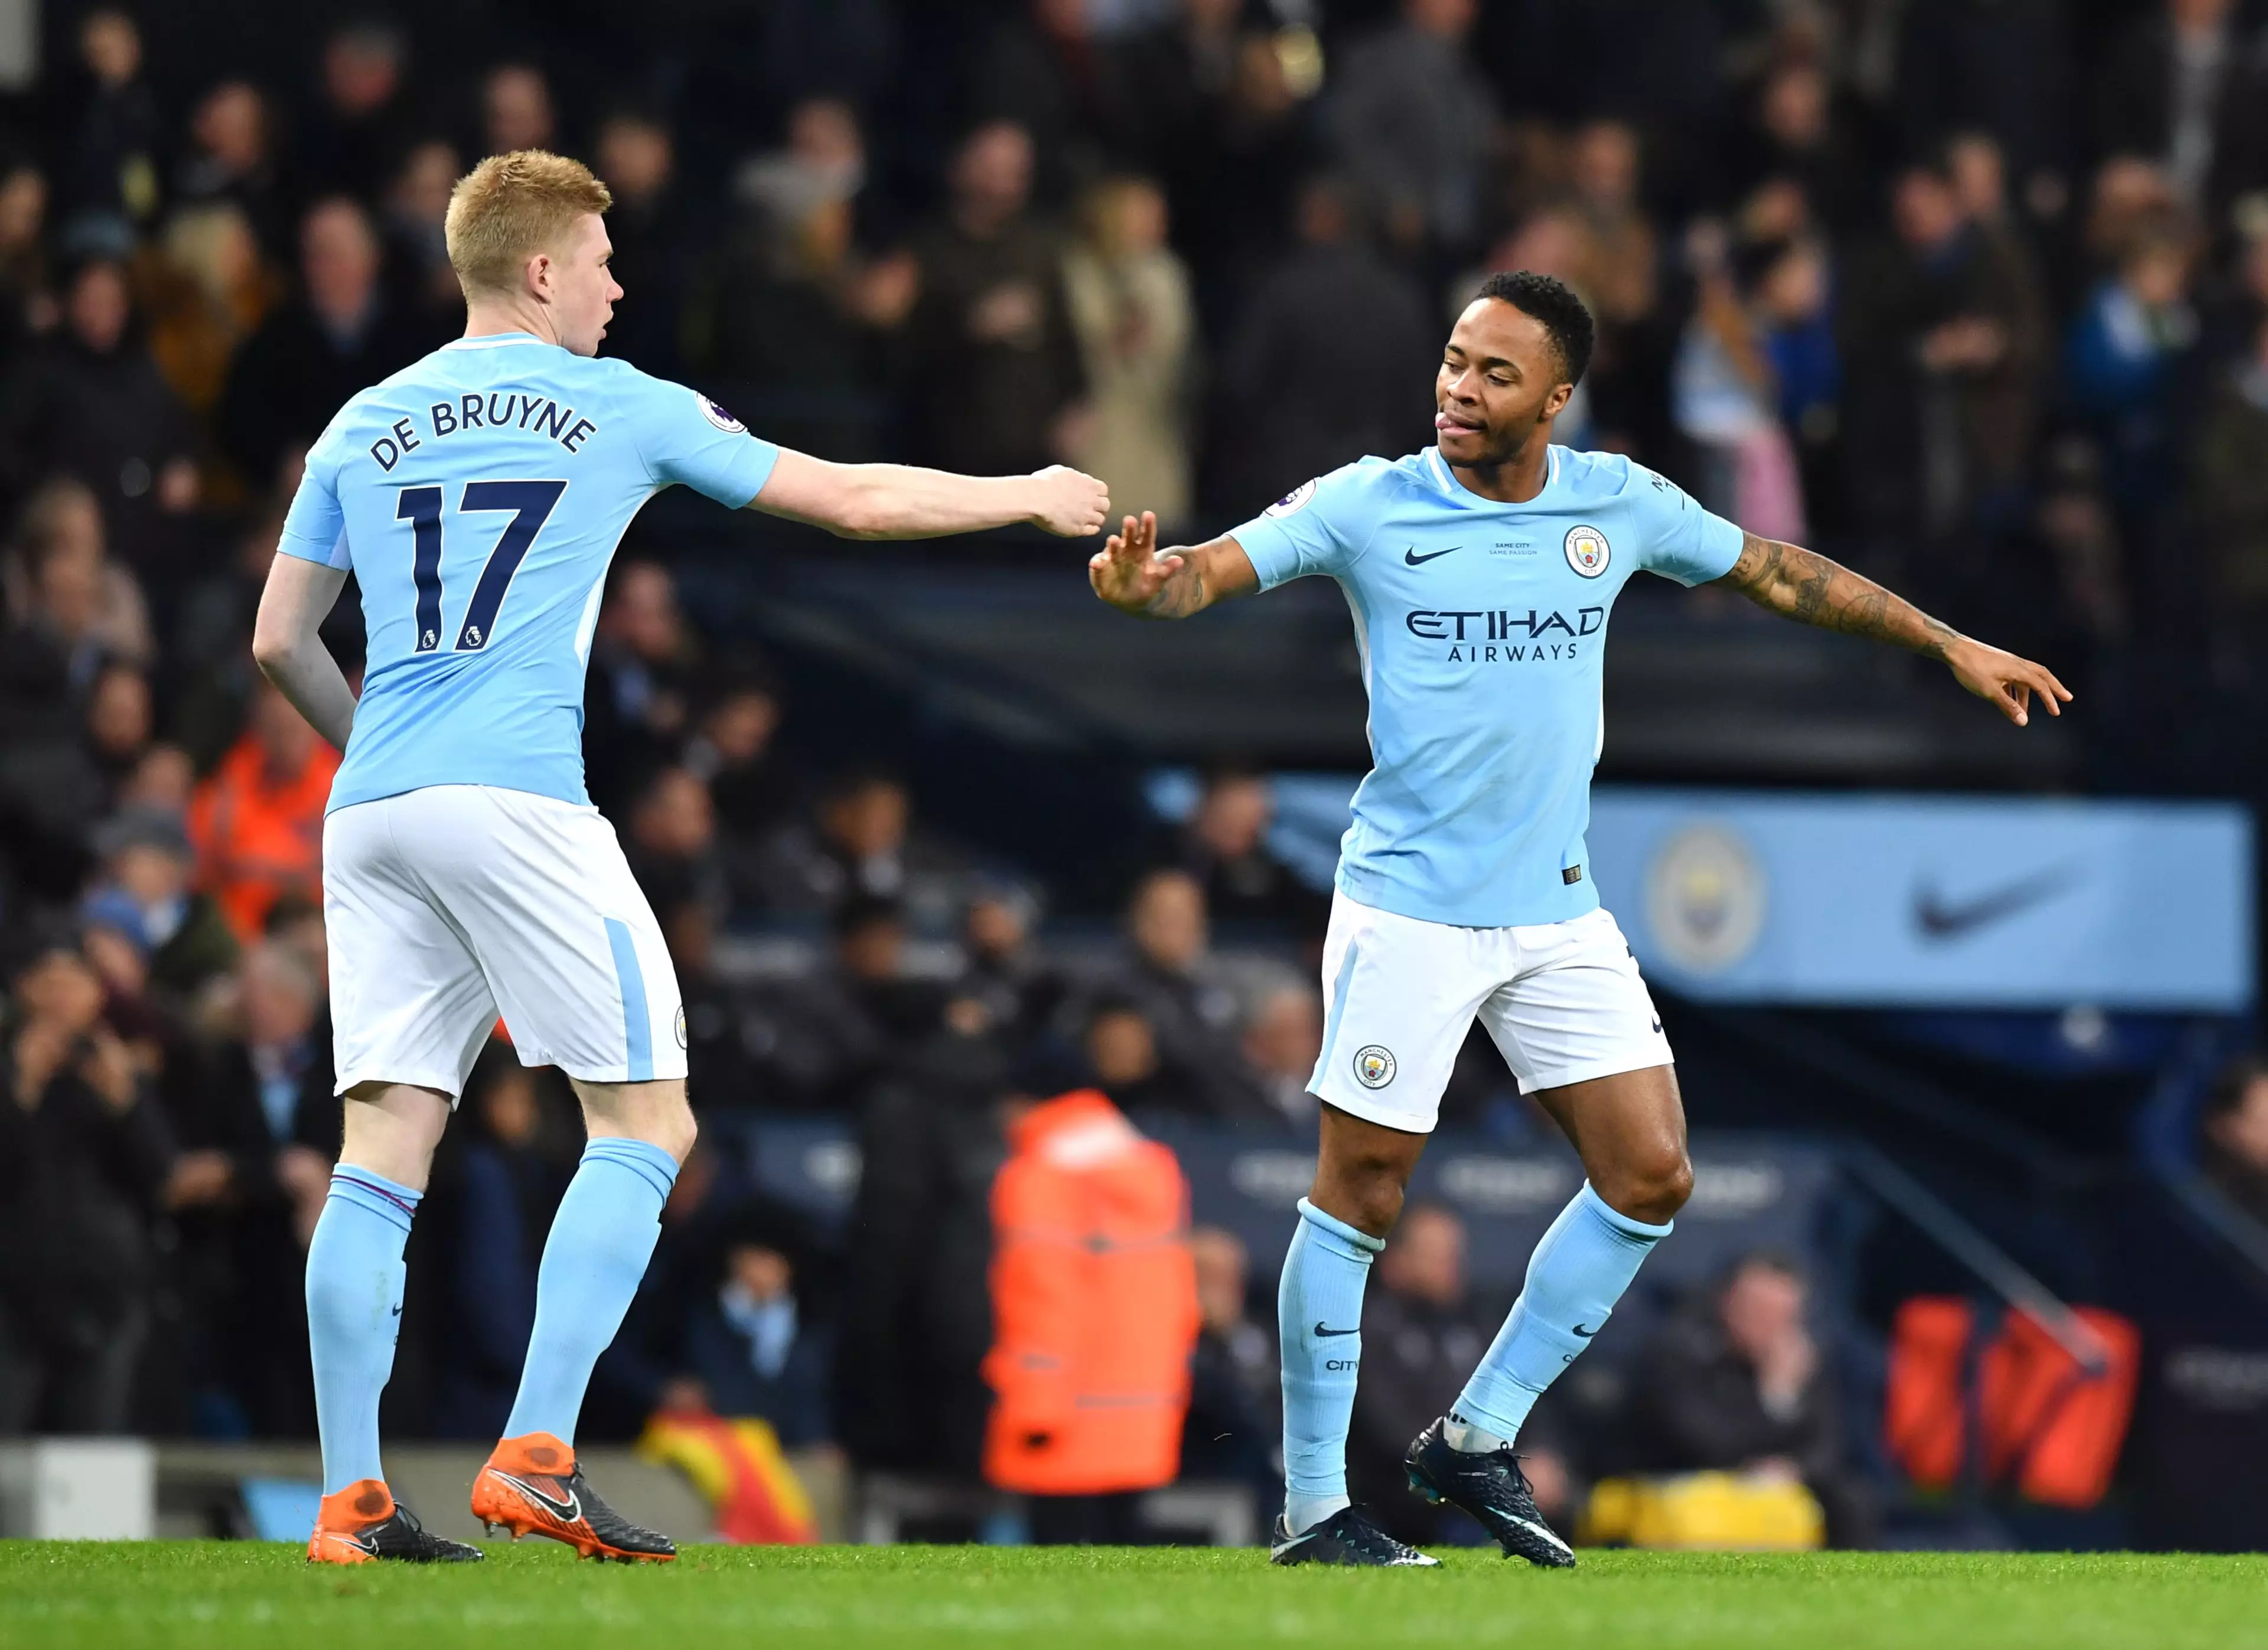 De Bruyne celebrates with Sterling. Image: PA